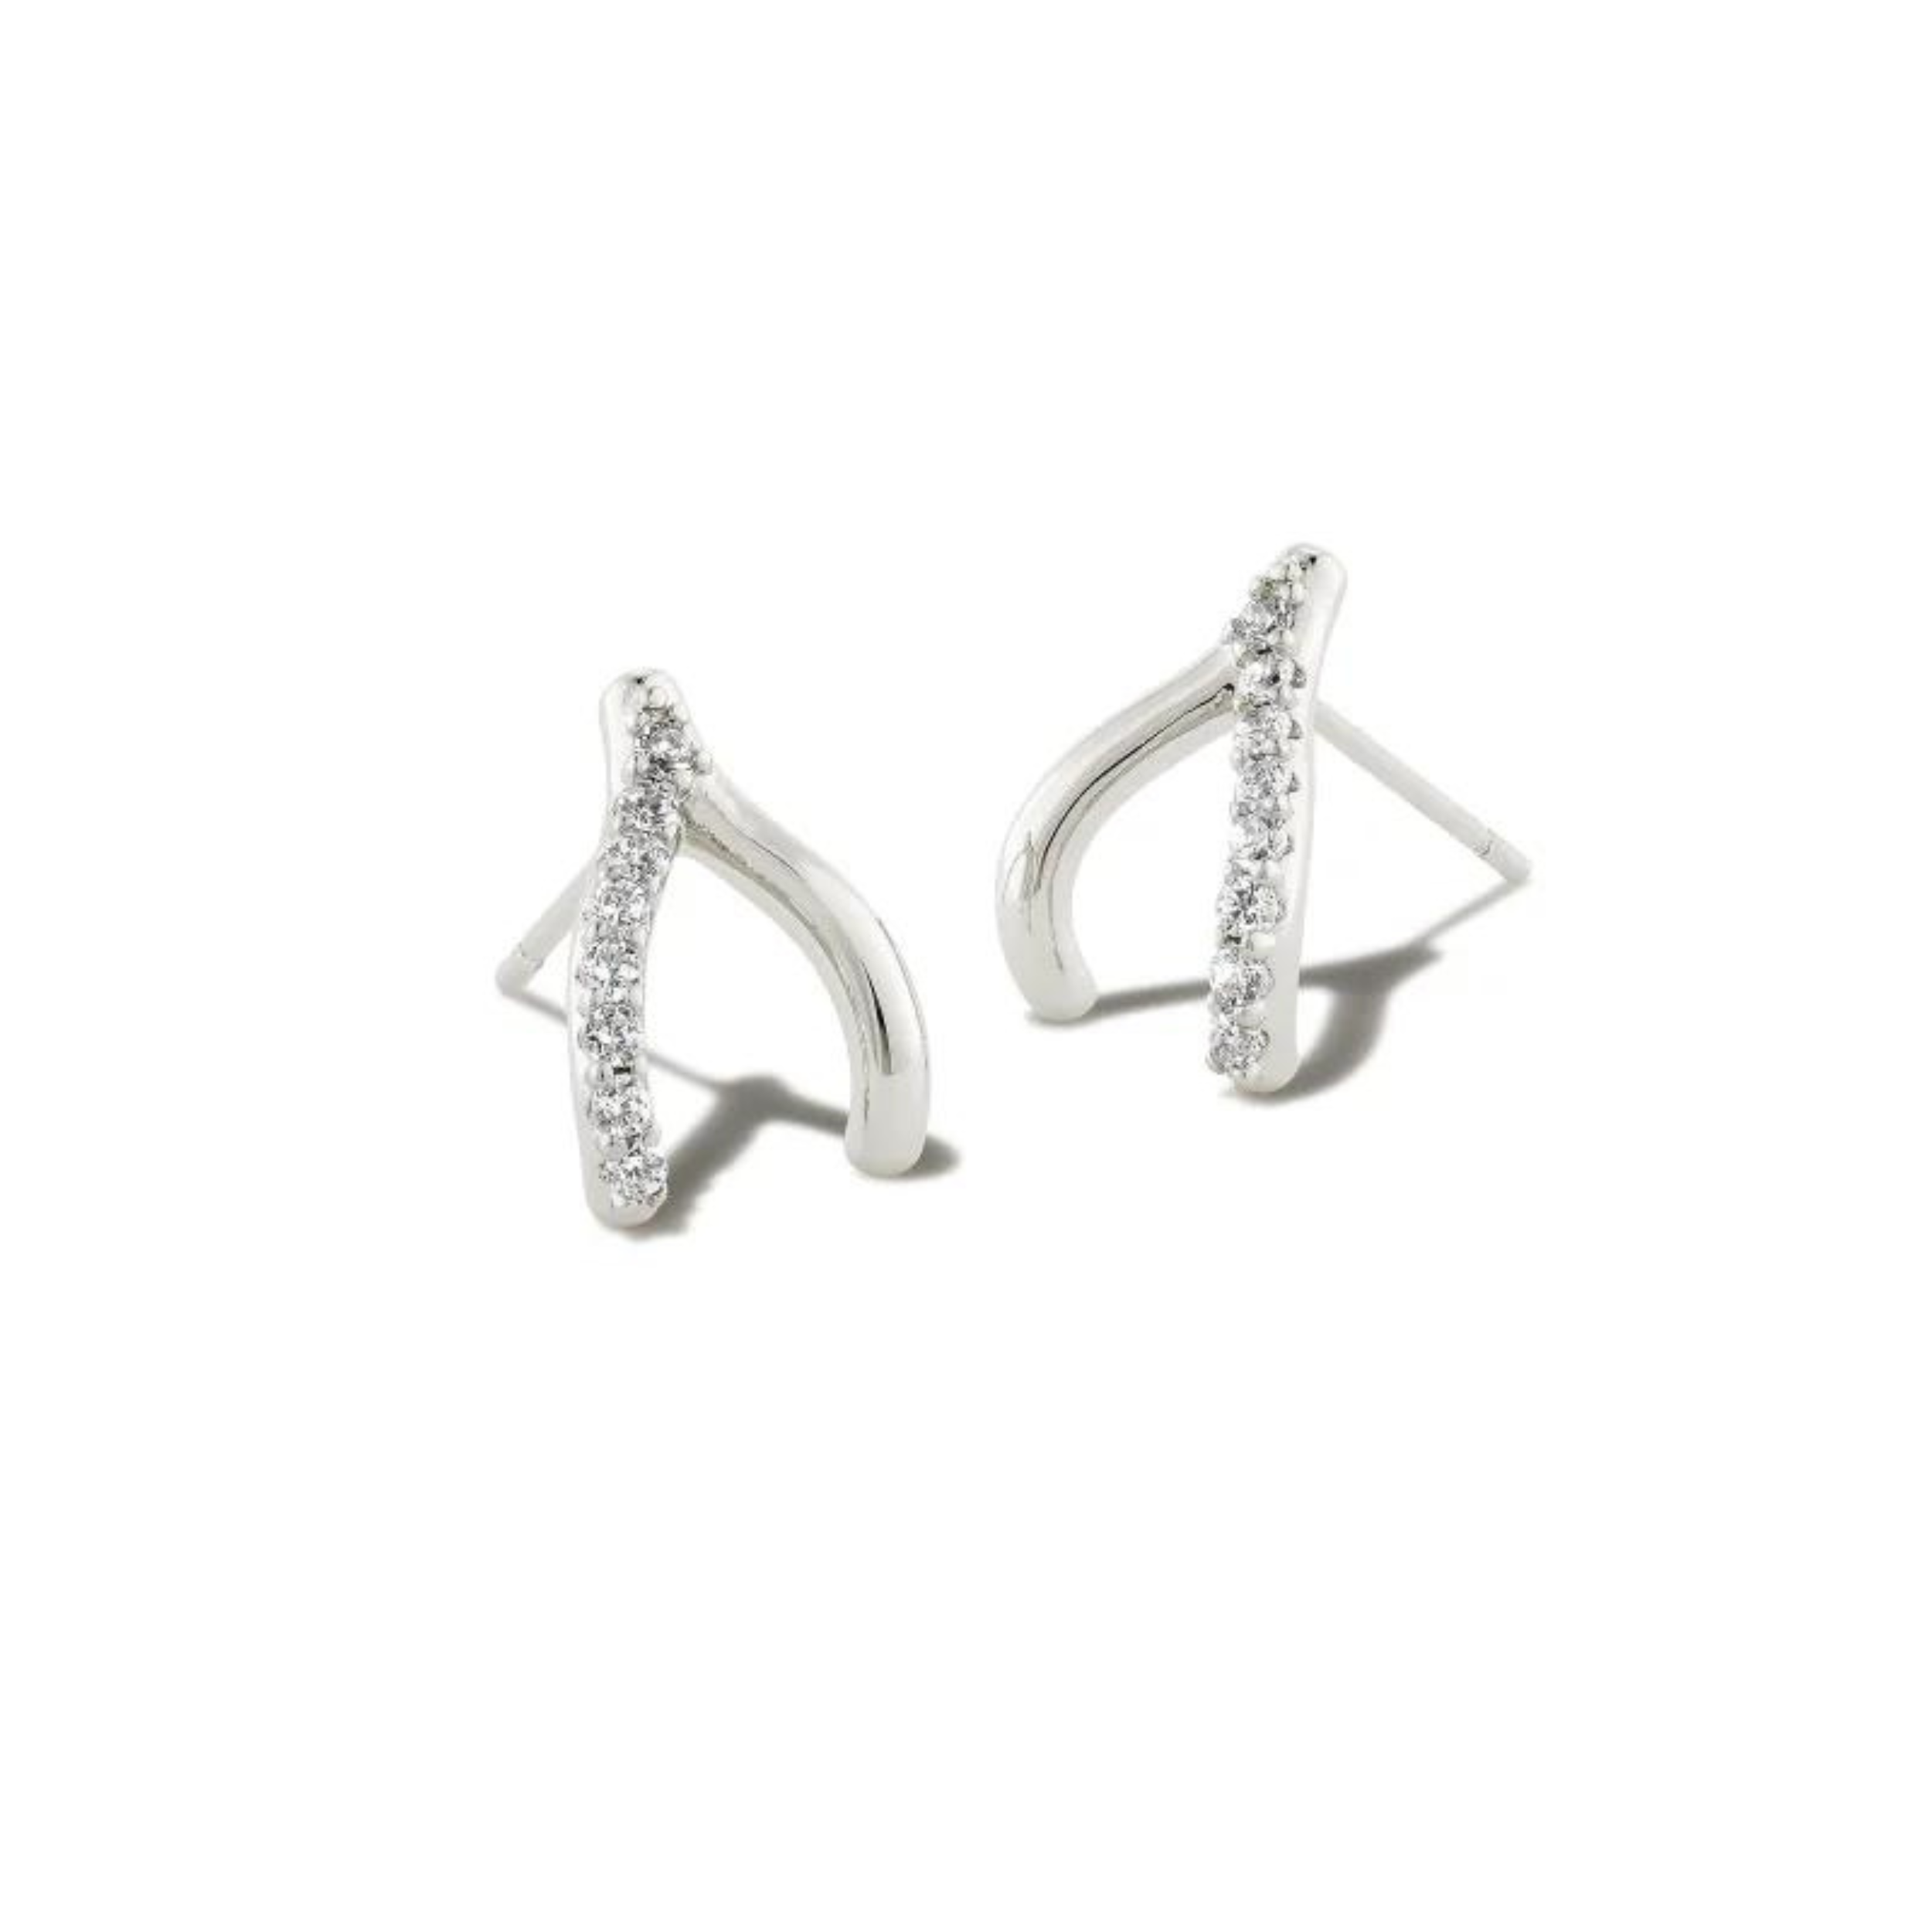 Silver wishbone shaped earrings with white crystals pictured on a white background.